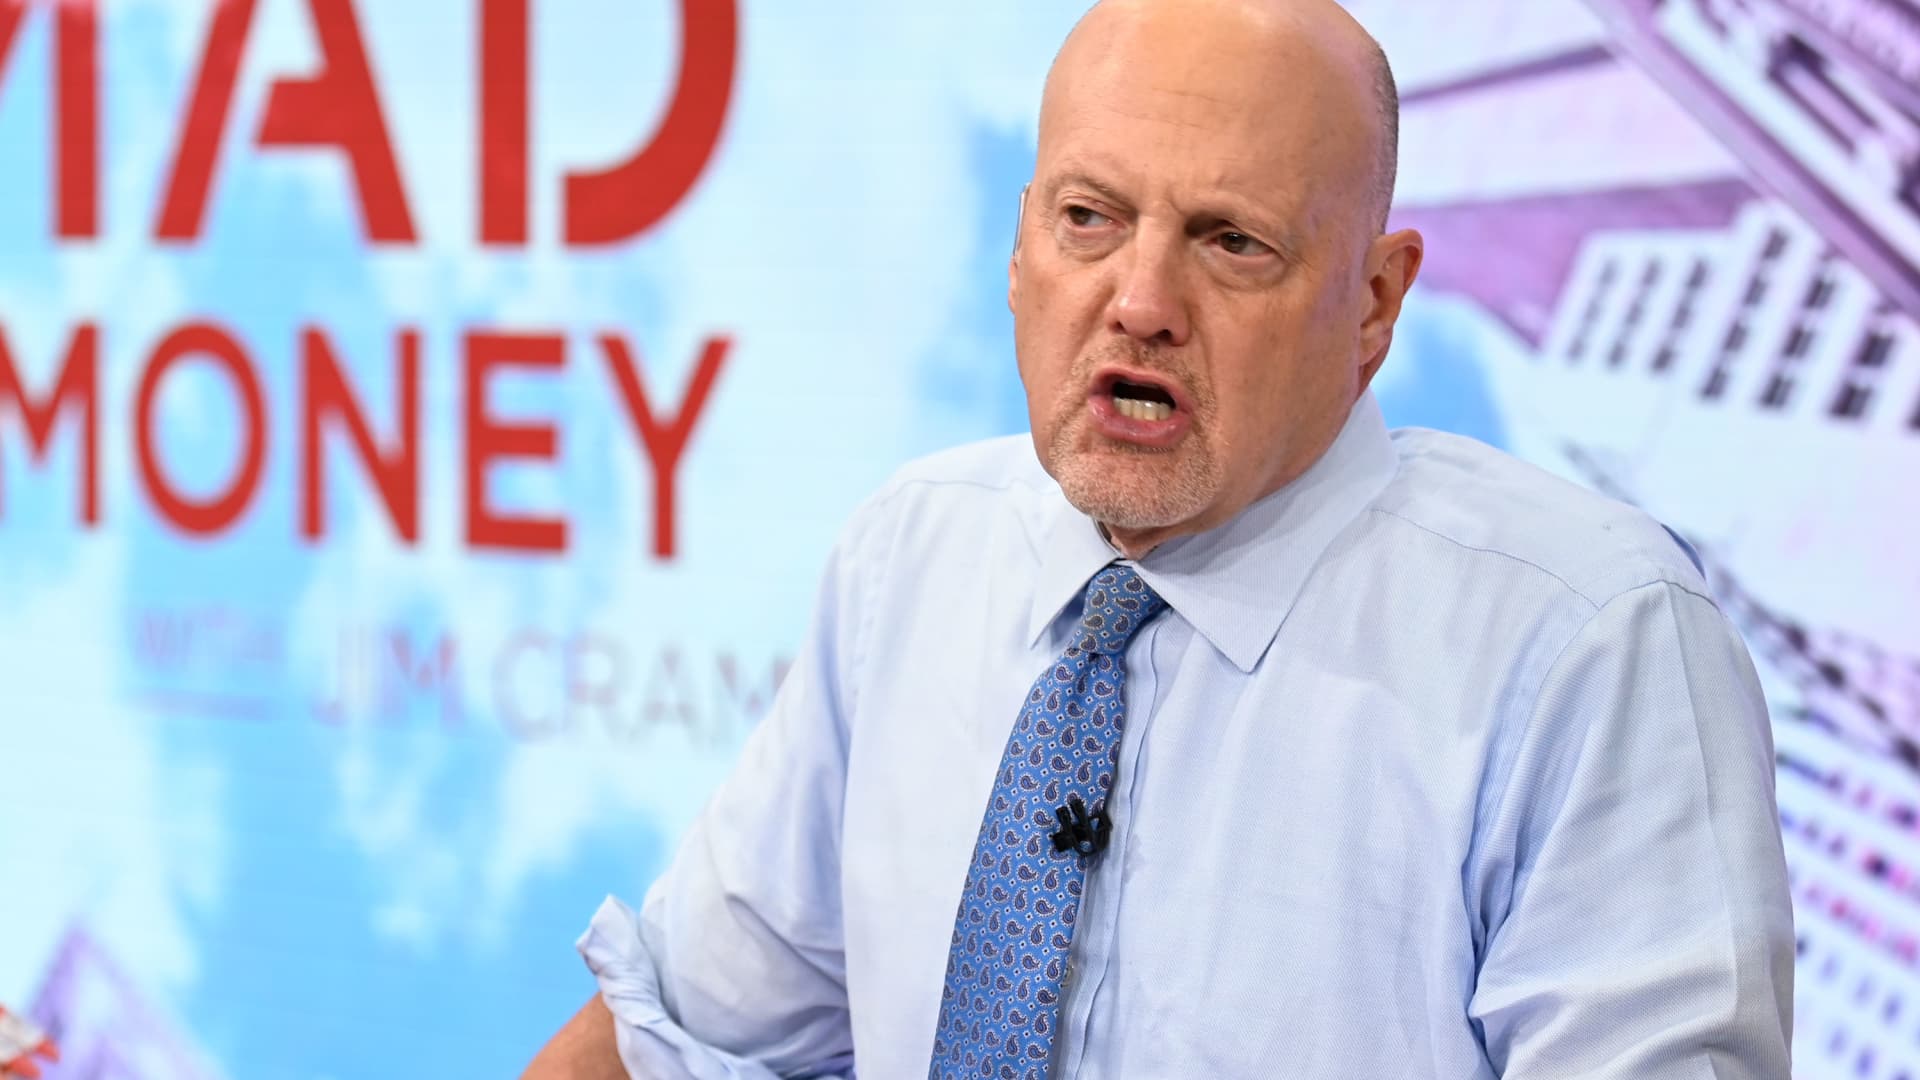 Cramer points out that stocks are receiving tailwinds from the dovish Fed meeting